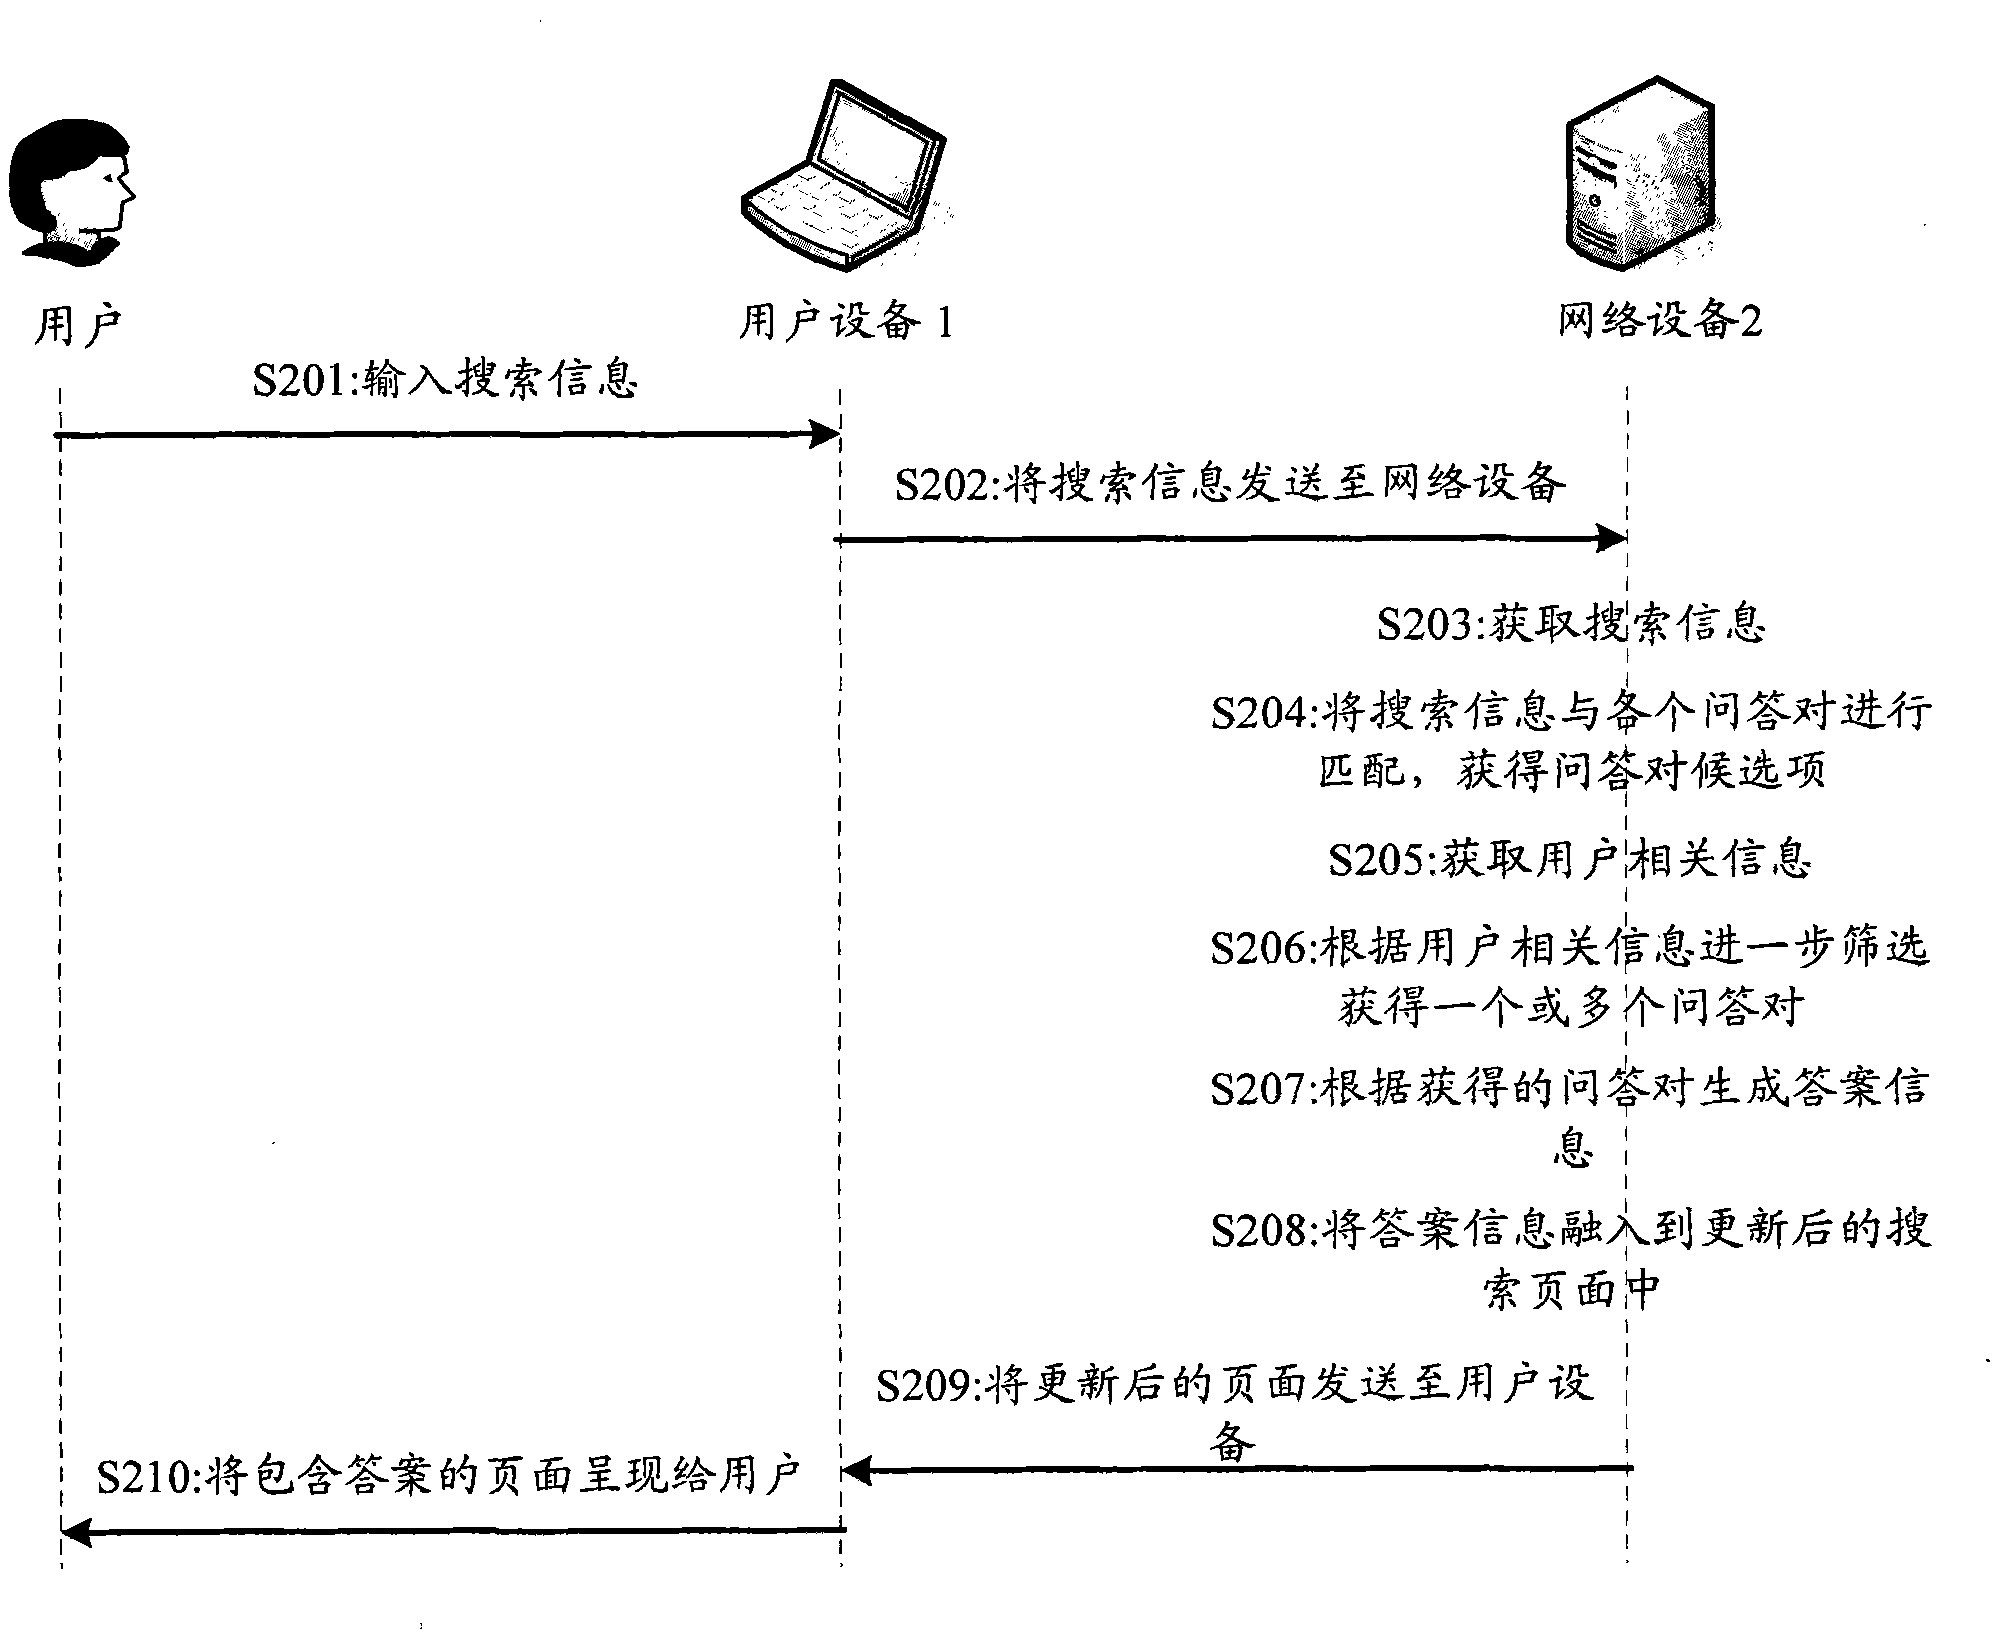 Method and equipment for displaying search answer information on search interface